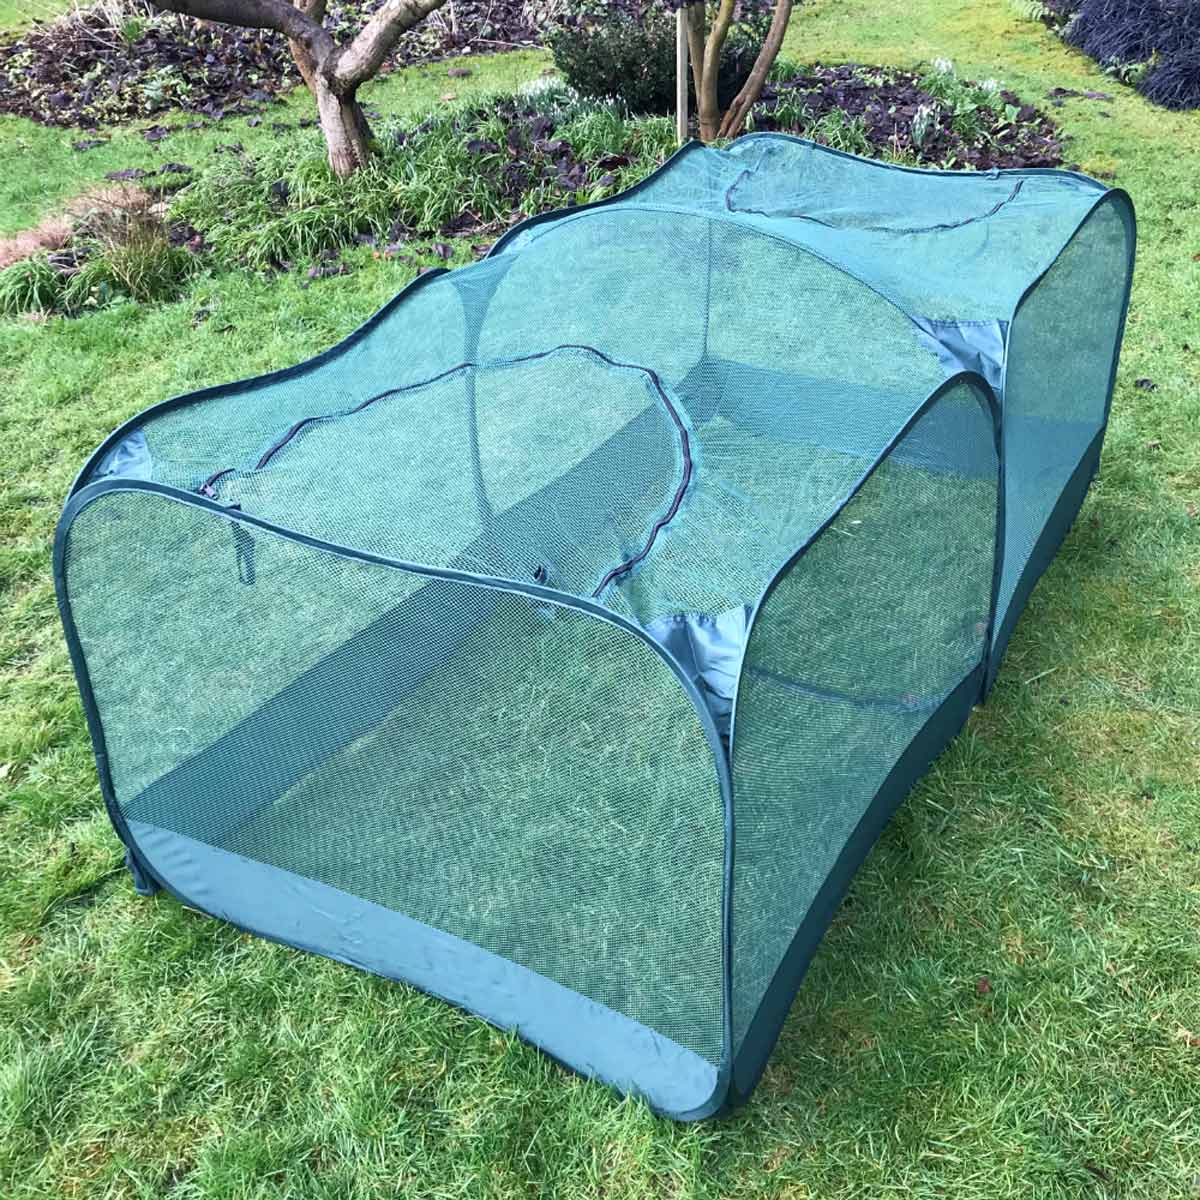 Garden Skill Gardenskill Giant Pop Up Fruit Cage And Plant Protection Cover 2.5 X 1.25 X 0.75M